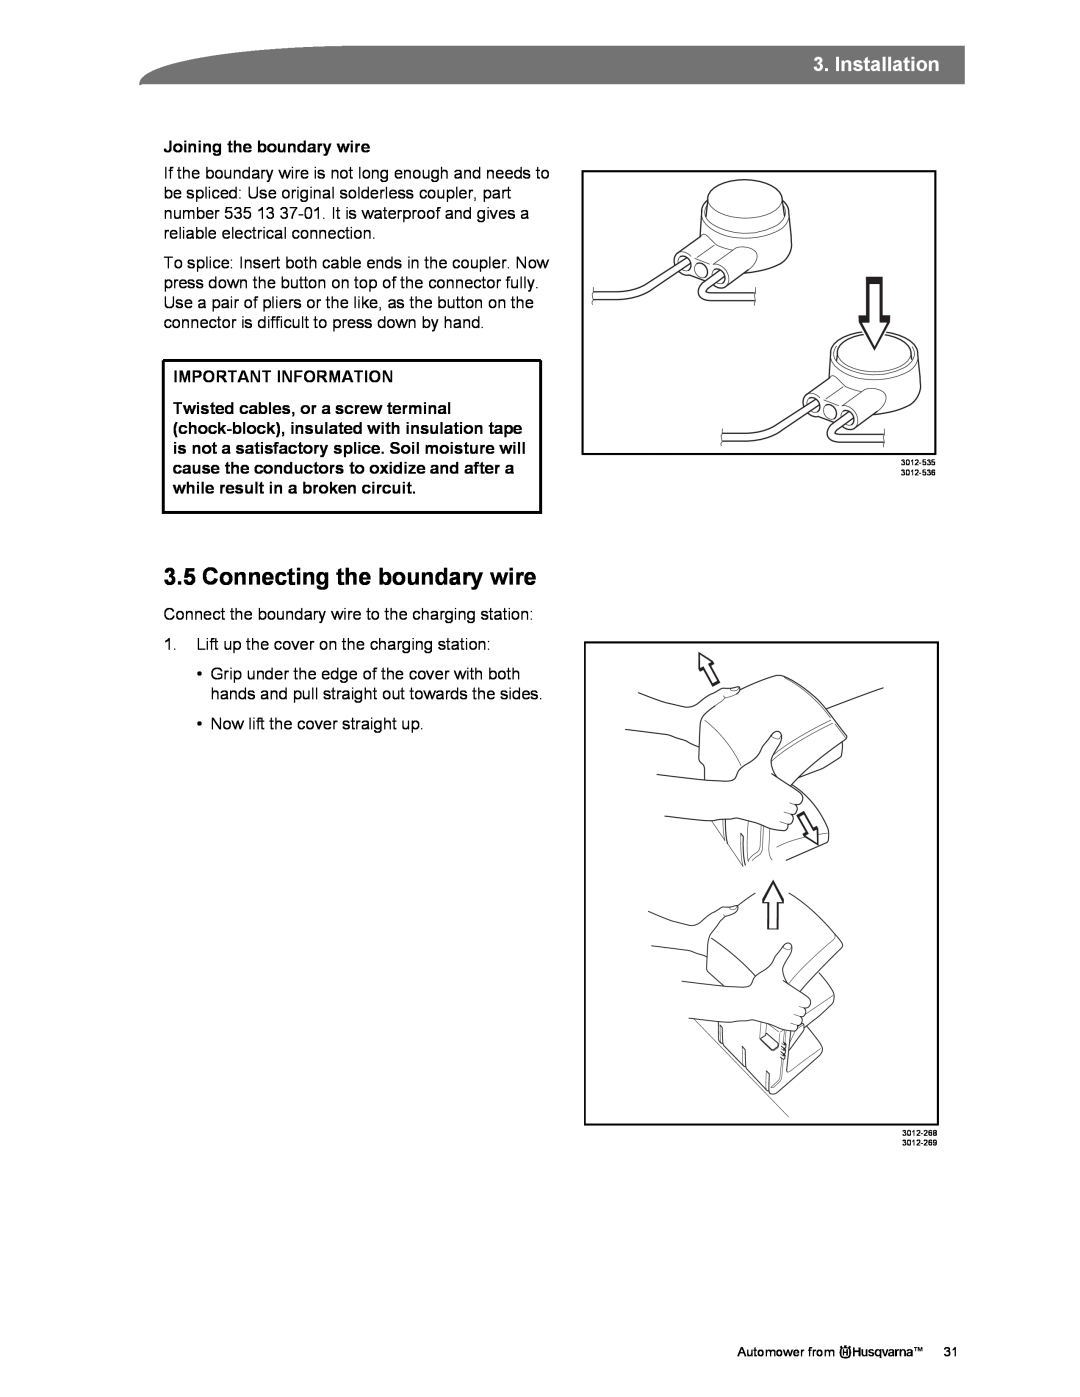 Husqvarna Automower manual Connecting the boundary wire, Joining the boundary wire, Installation, Important Information 